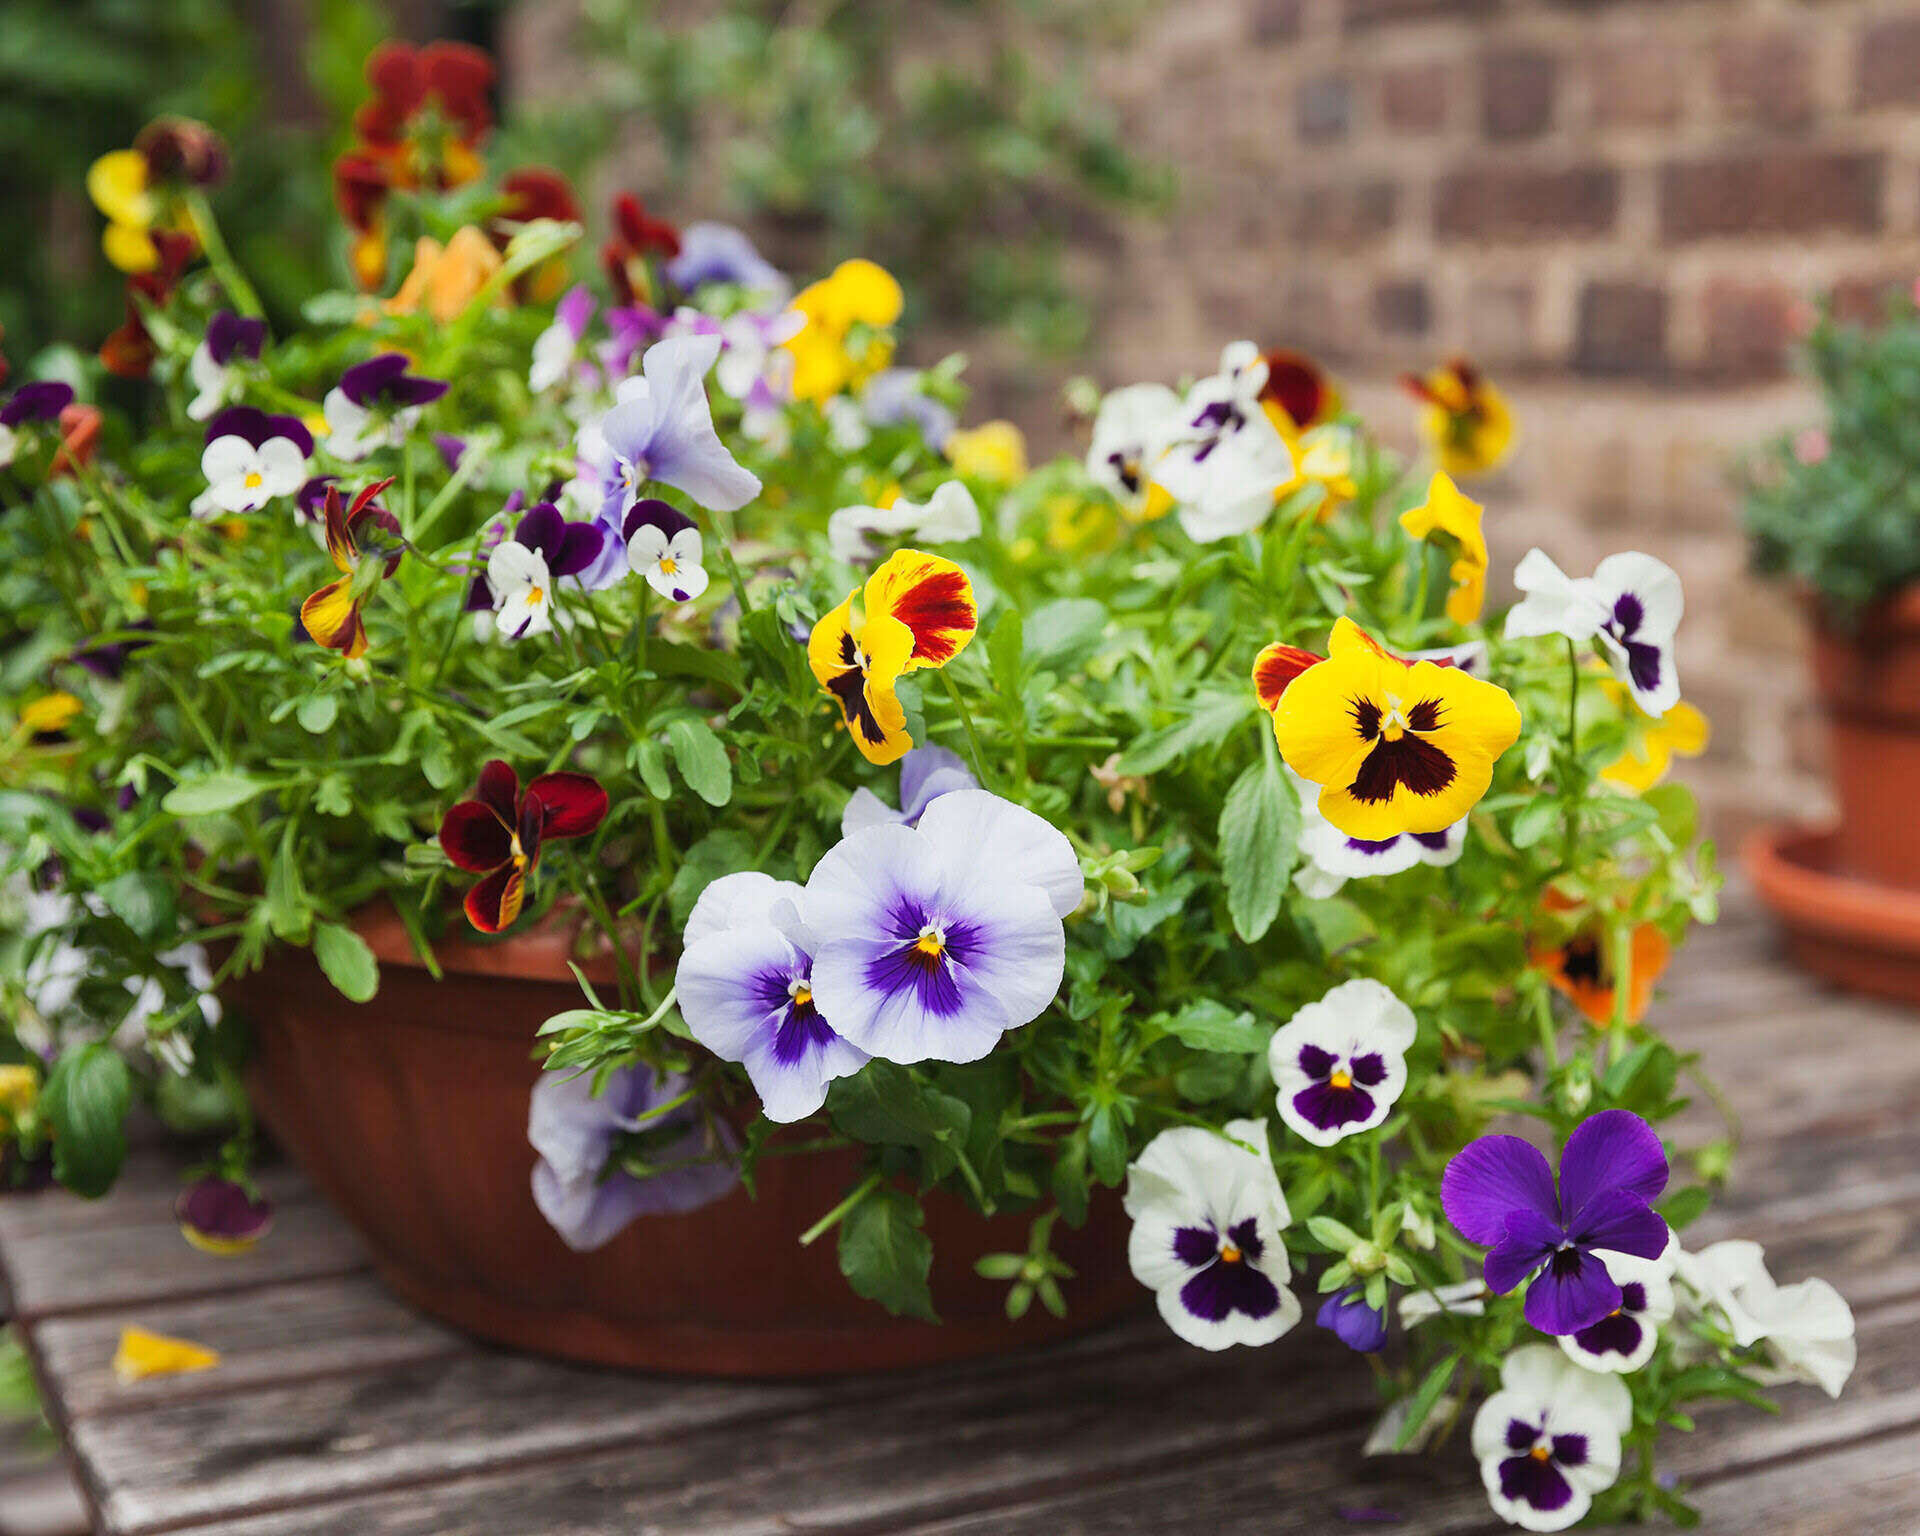 How Long Does It Take Pansies To Bloom From Seed